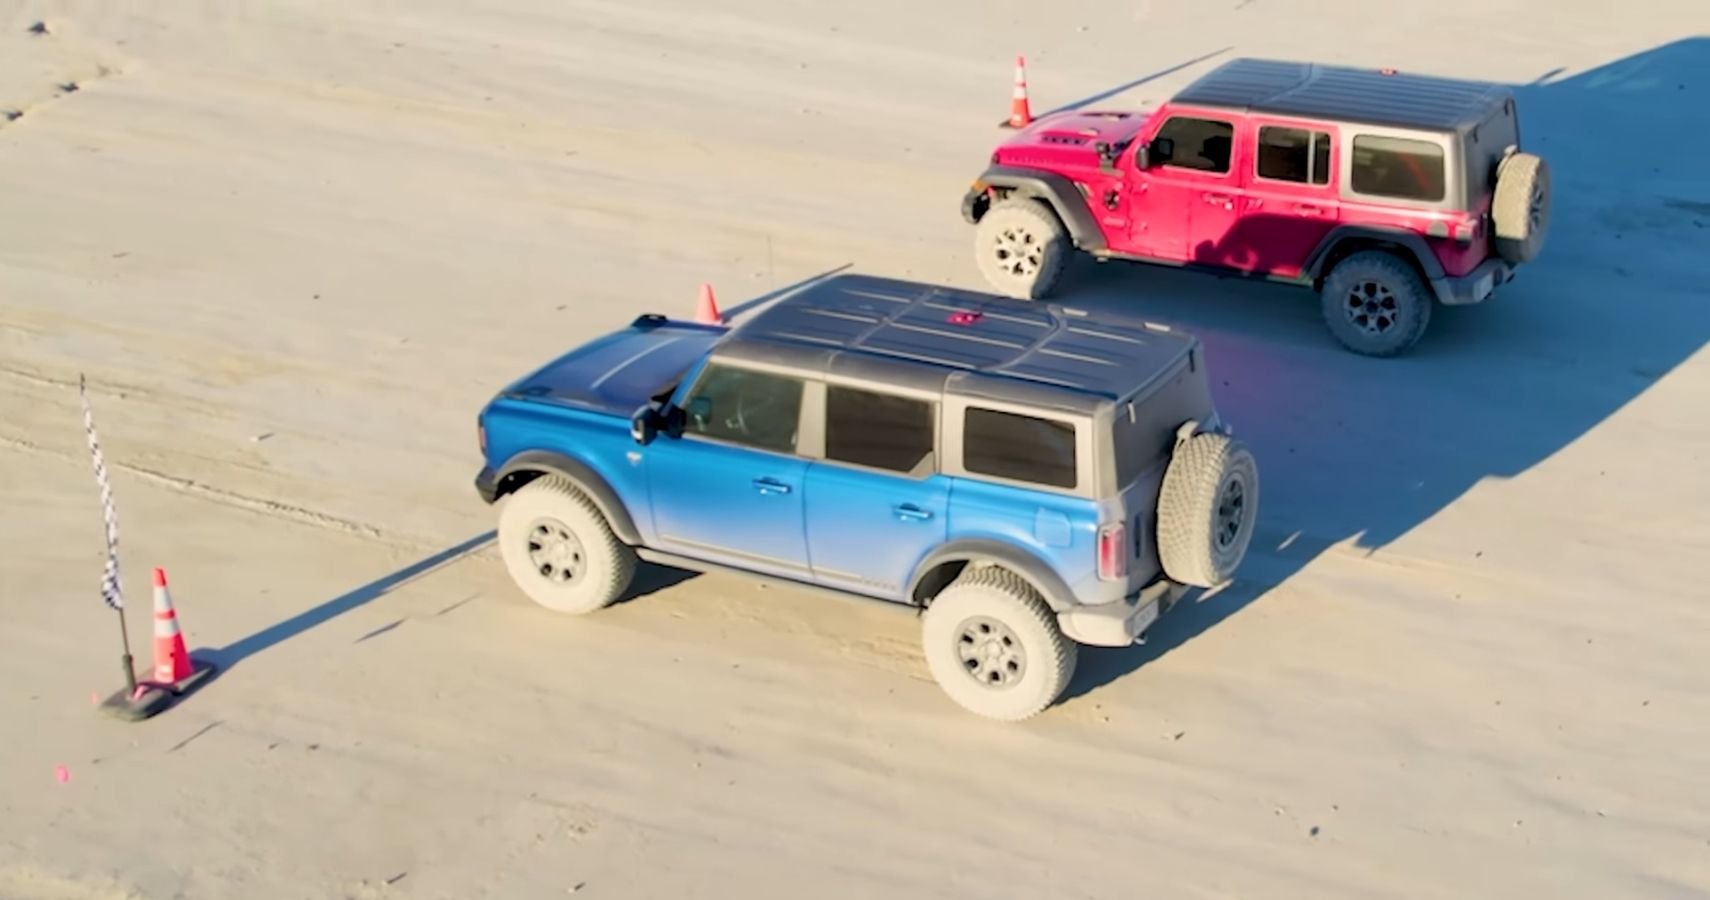 Watch The Ford Bronco And Jeep Wrangler Drag Race In The Dirt